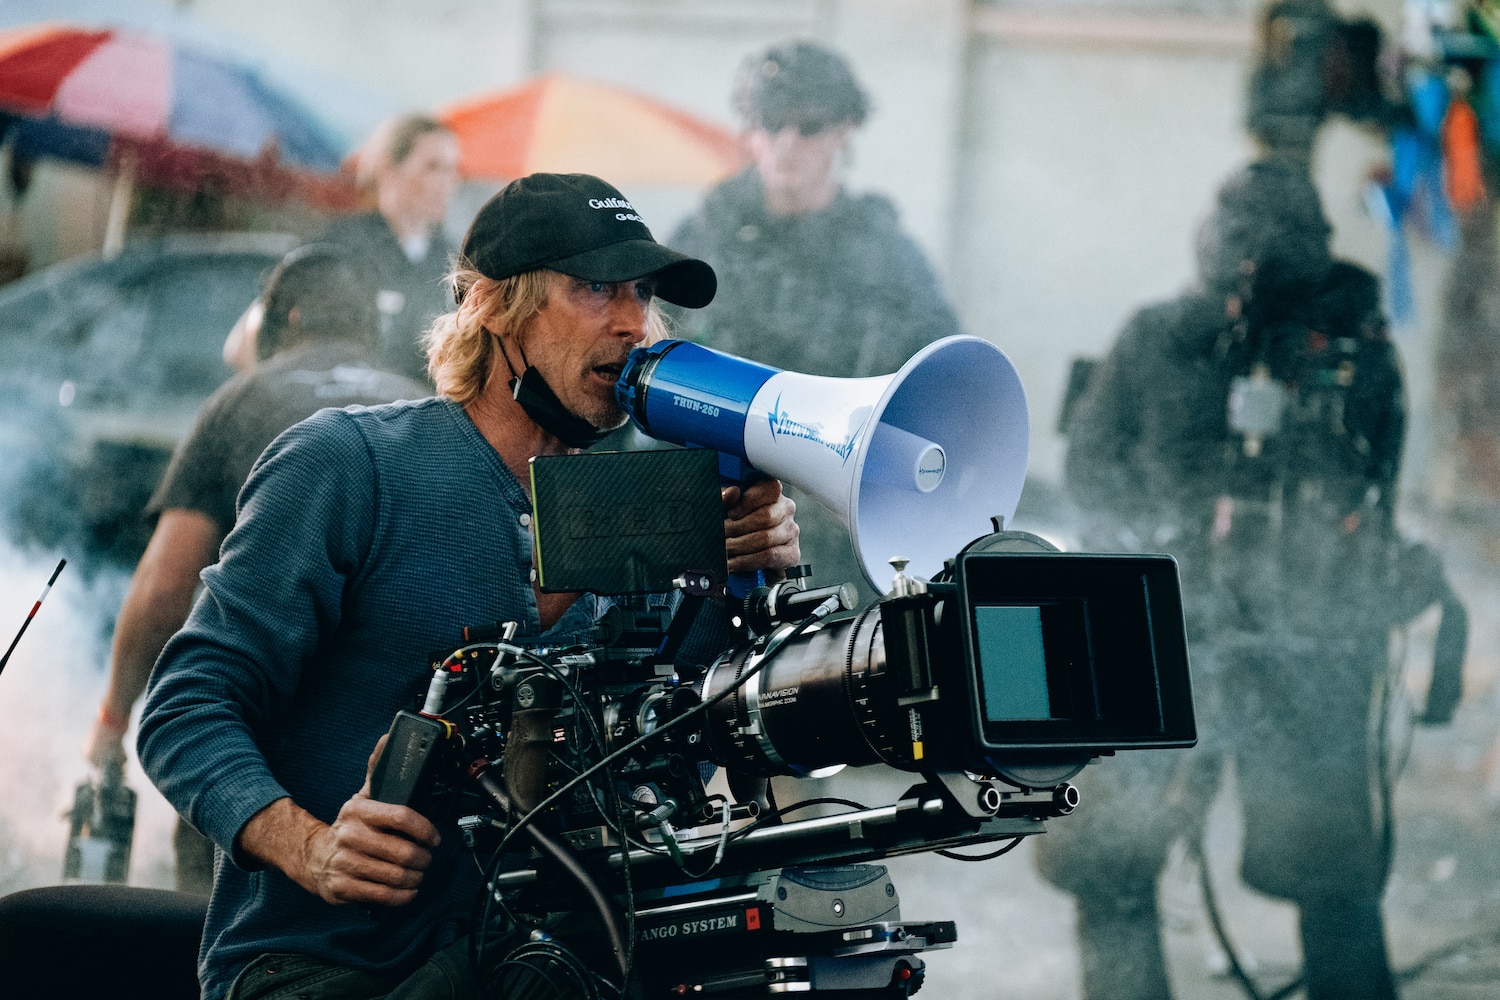 How Michael Bay used coolness factor to recruit actual California